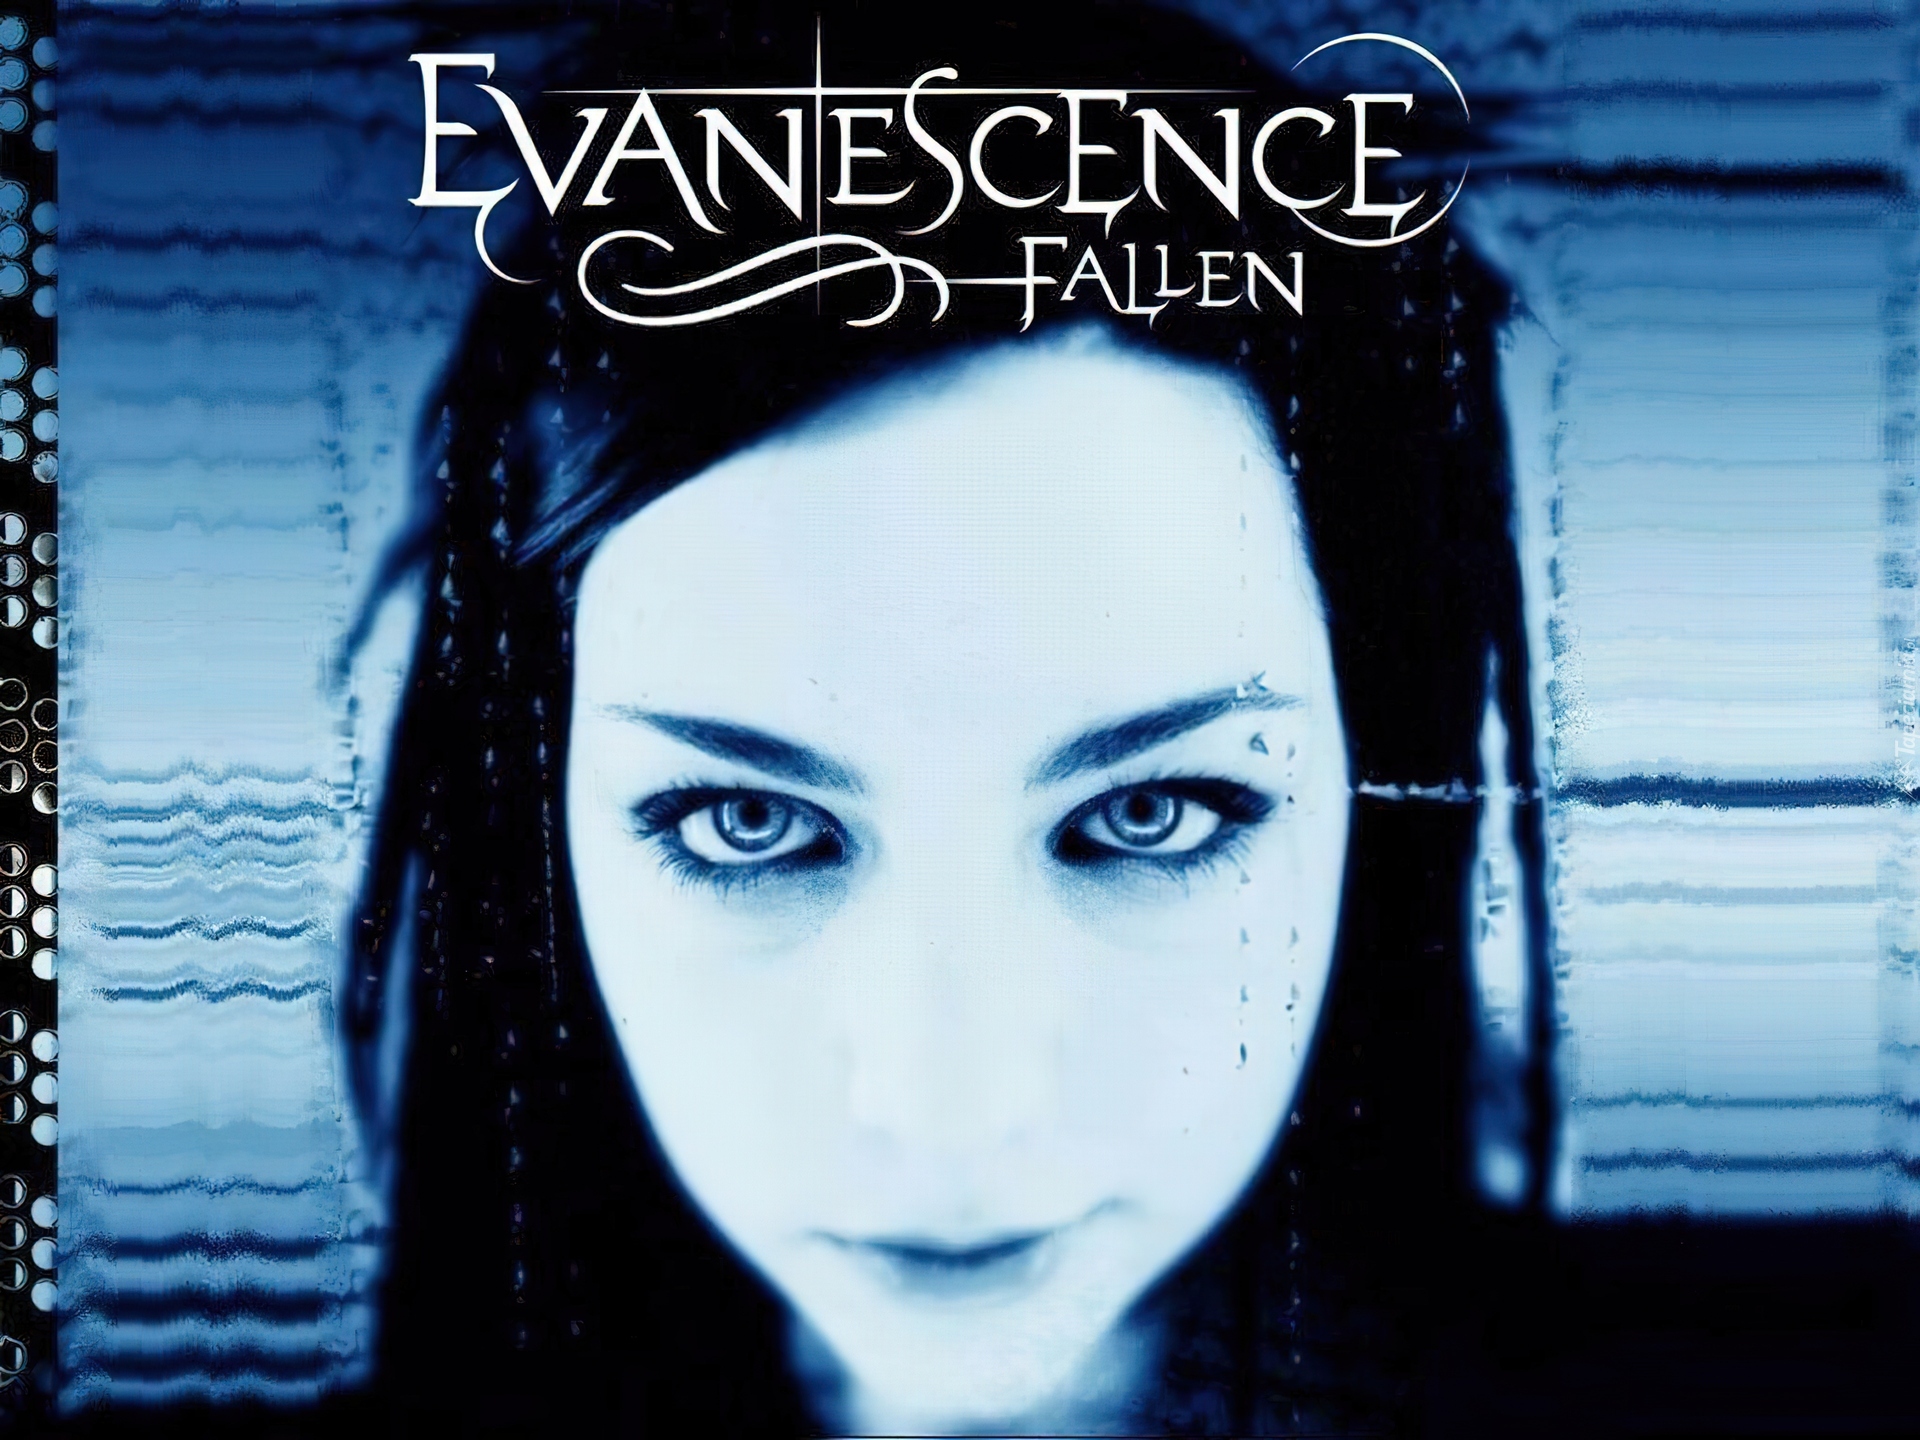 Evanescence hello. Evanescence going under. Evanescence - Fallen. Evanescence bring me to Life. Evanescence Wake me up inside текст.